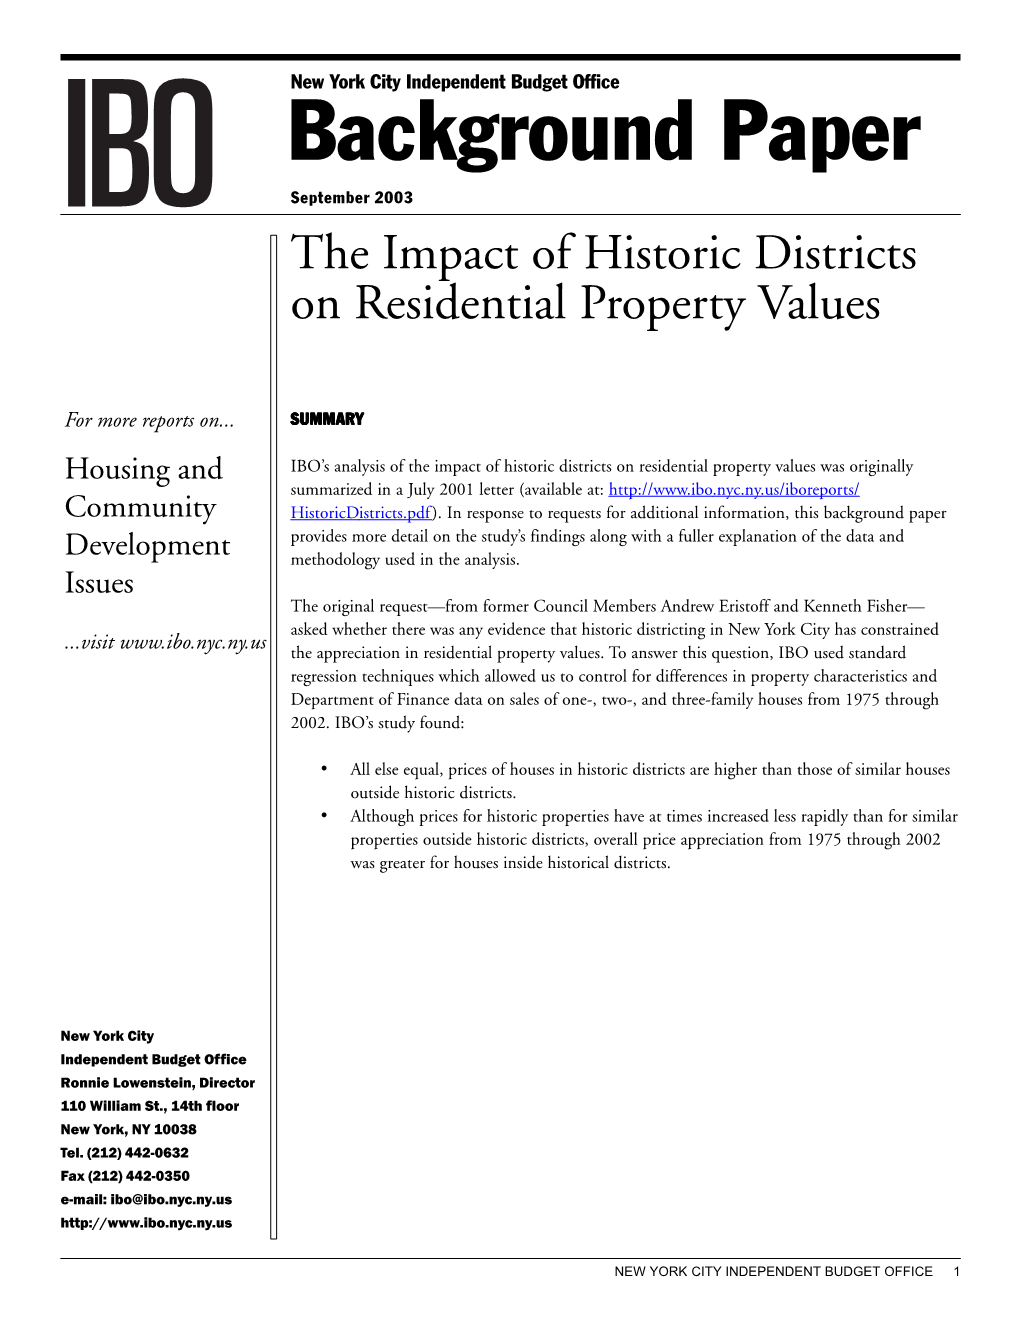 The Impact of Historic Districts on Residential Property Values